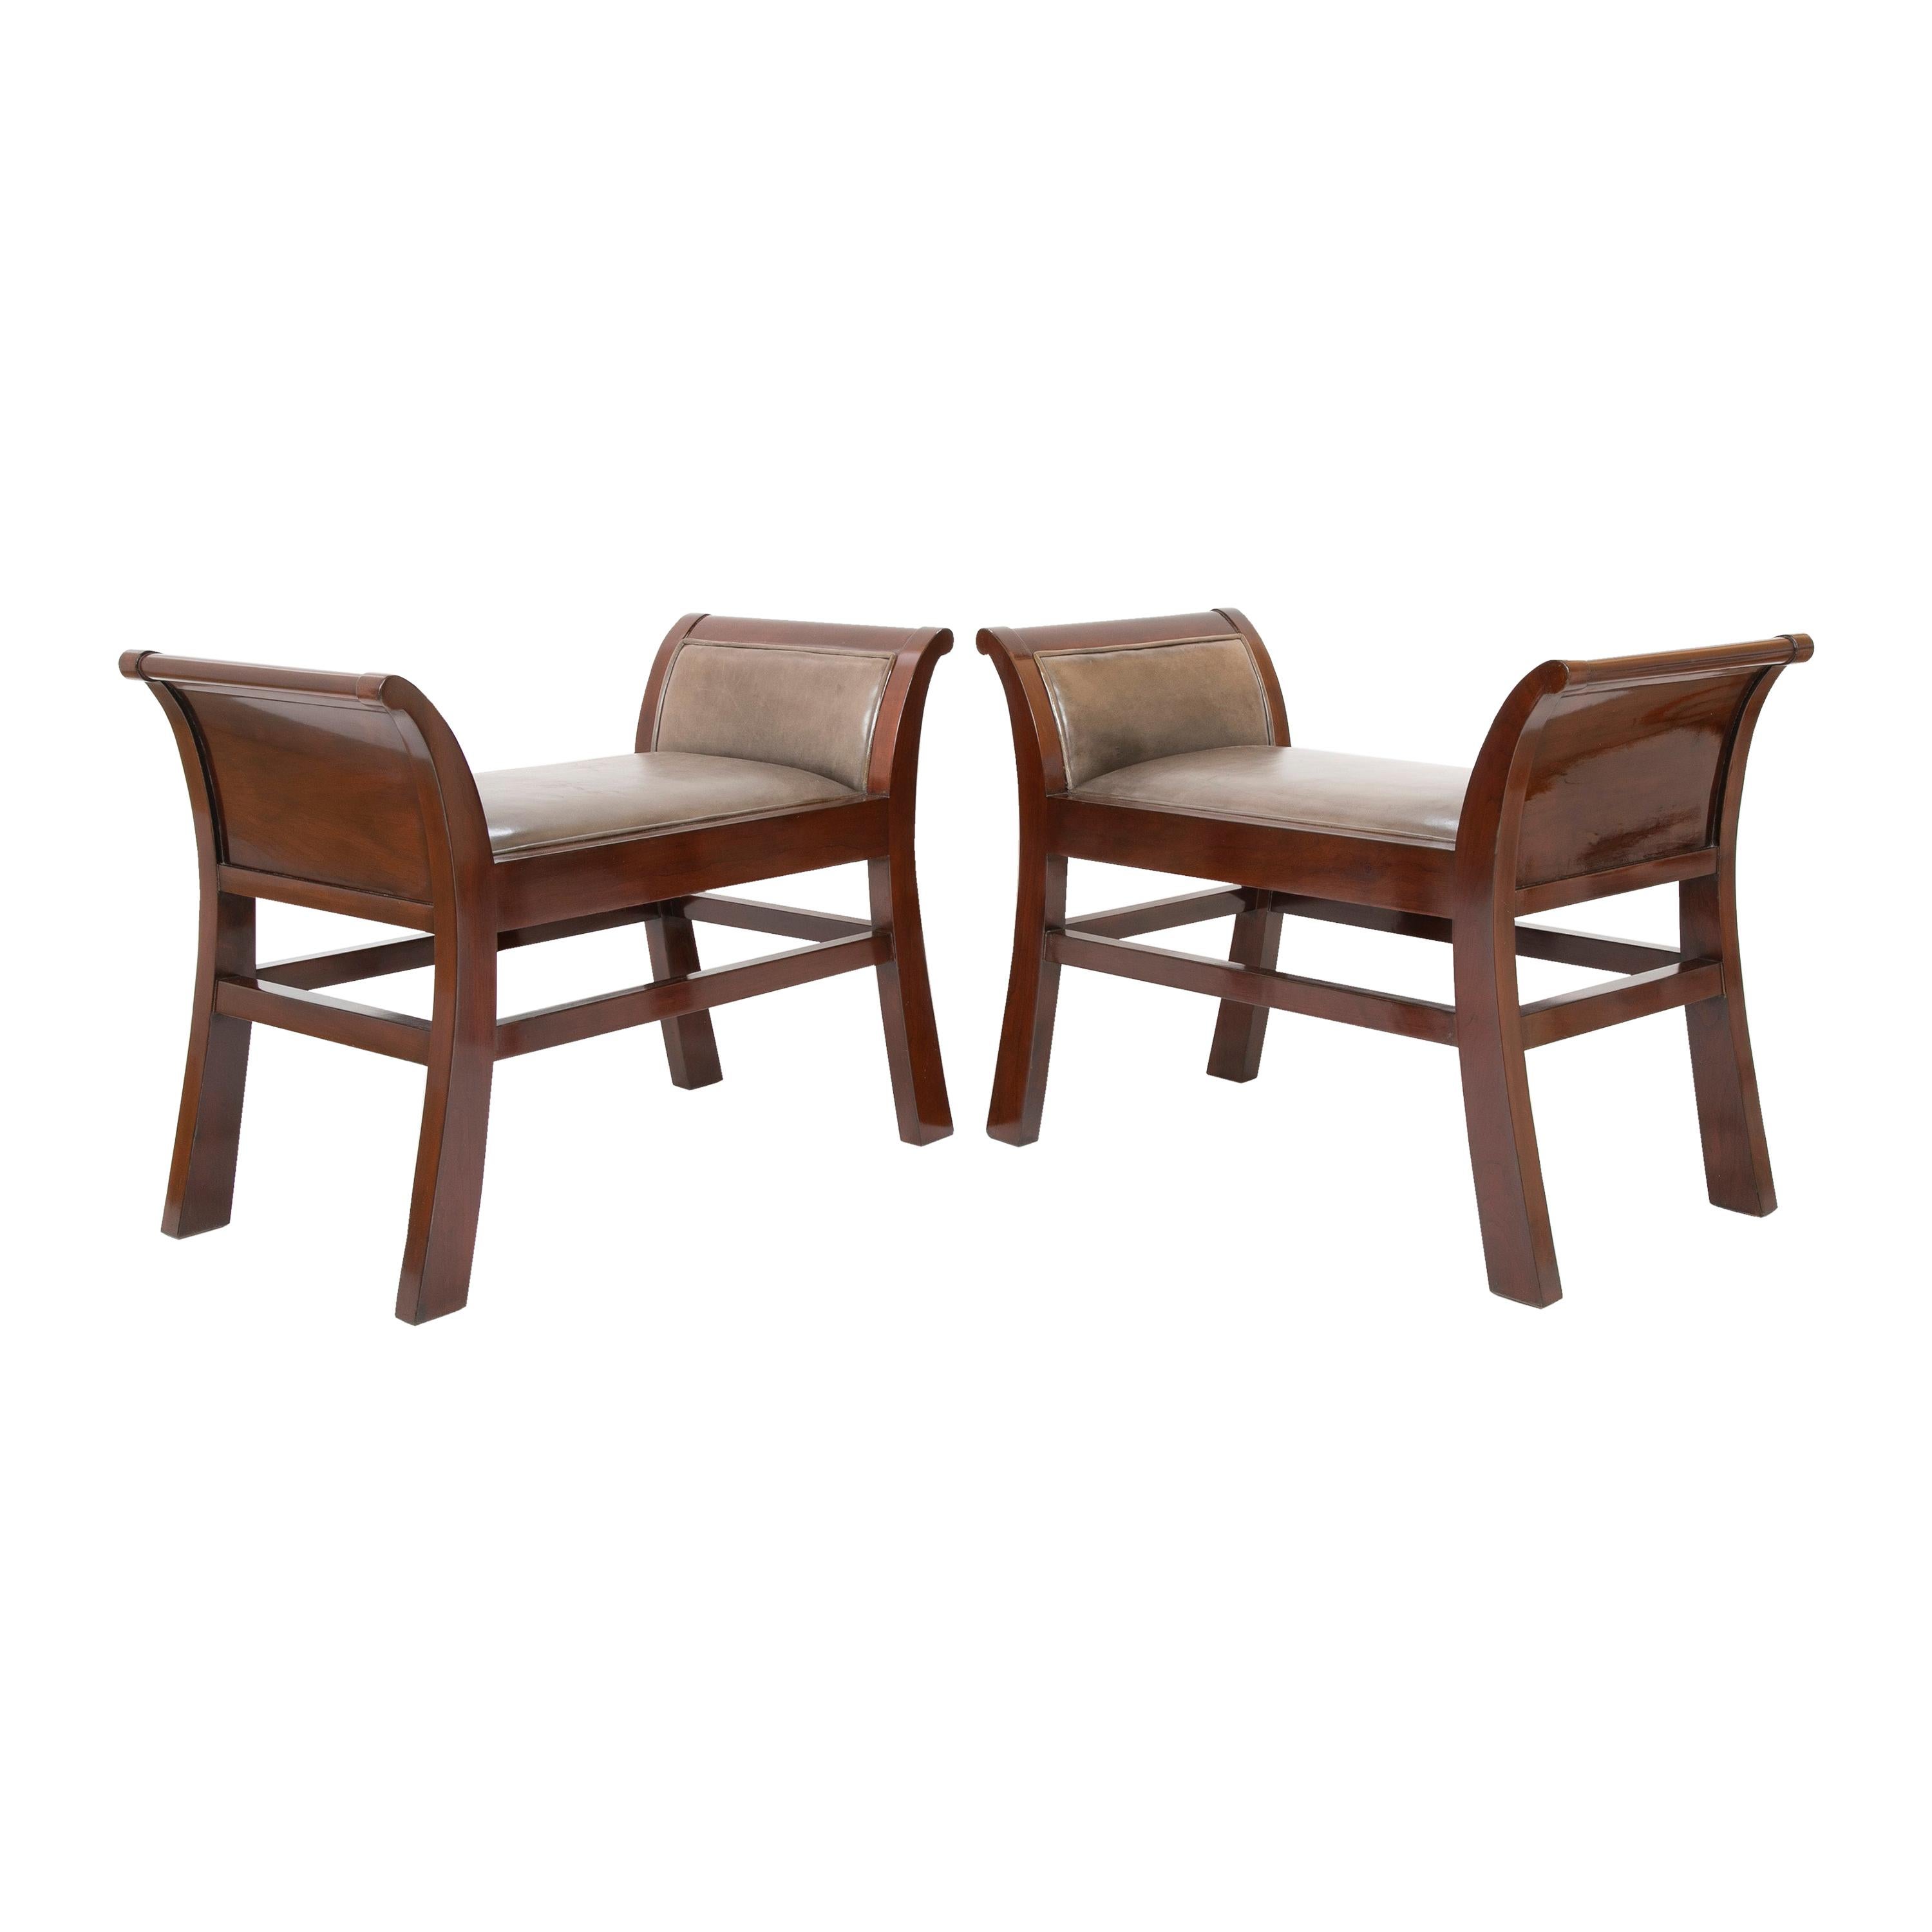 Pair of Leather Benches Designed by Jacques Grange for John Widdicomb